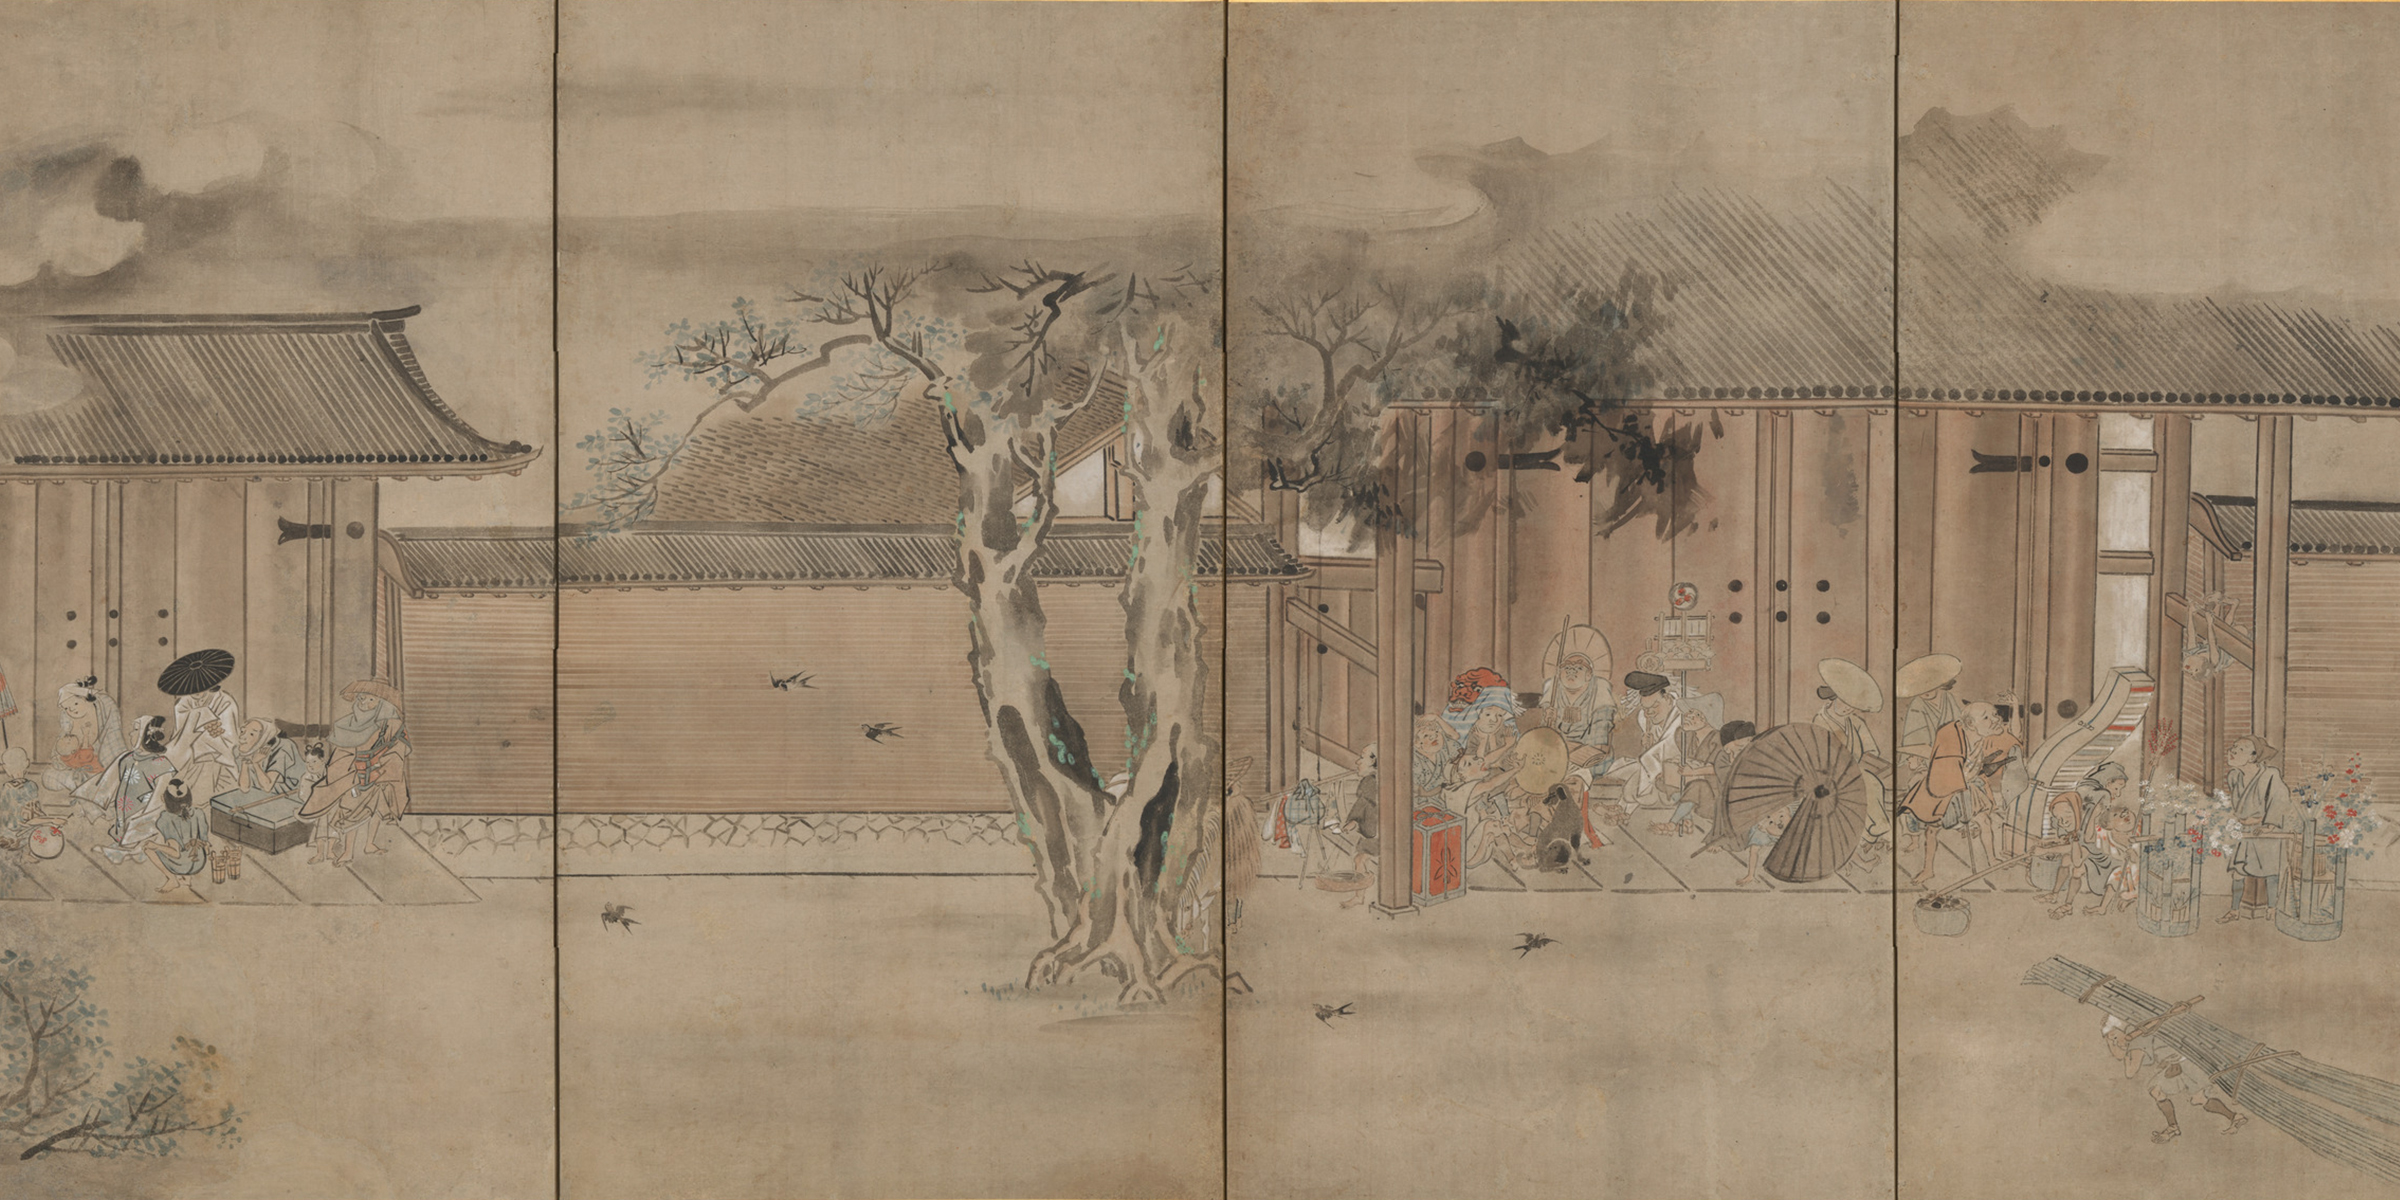 Taking Shelter from the Rain, by Hanabusa Itcho, c. 1710. The Metropolitan Museum of Art, Mary Griggs Burke Collection, Gift of the Mary and Jackson Burke Foundation, 2015.